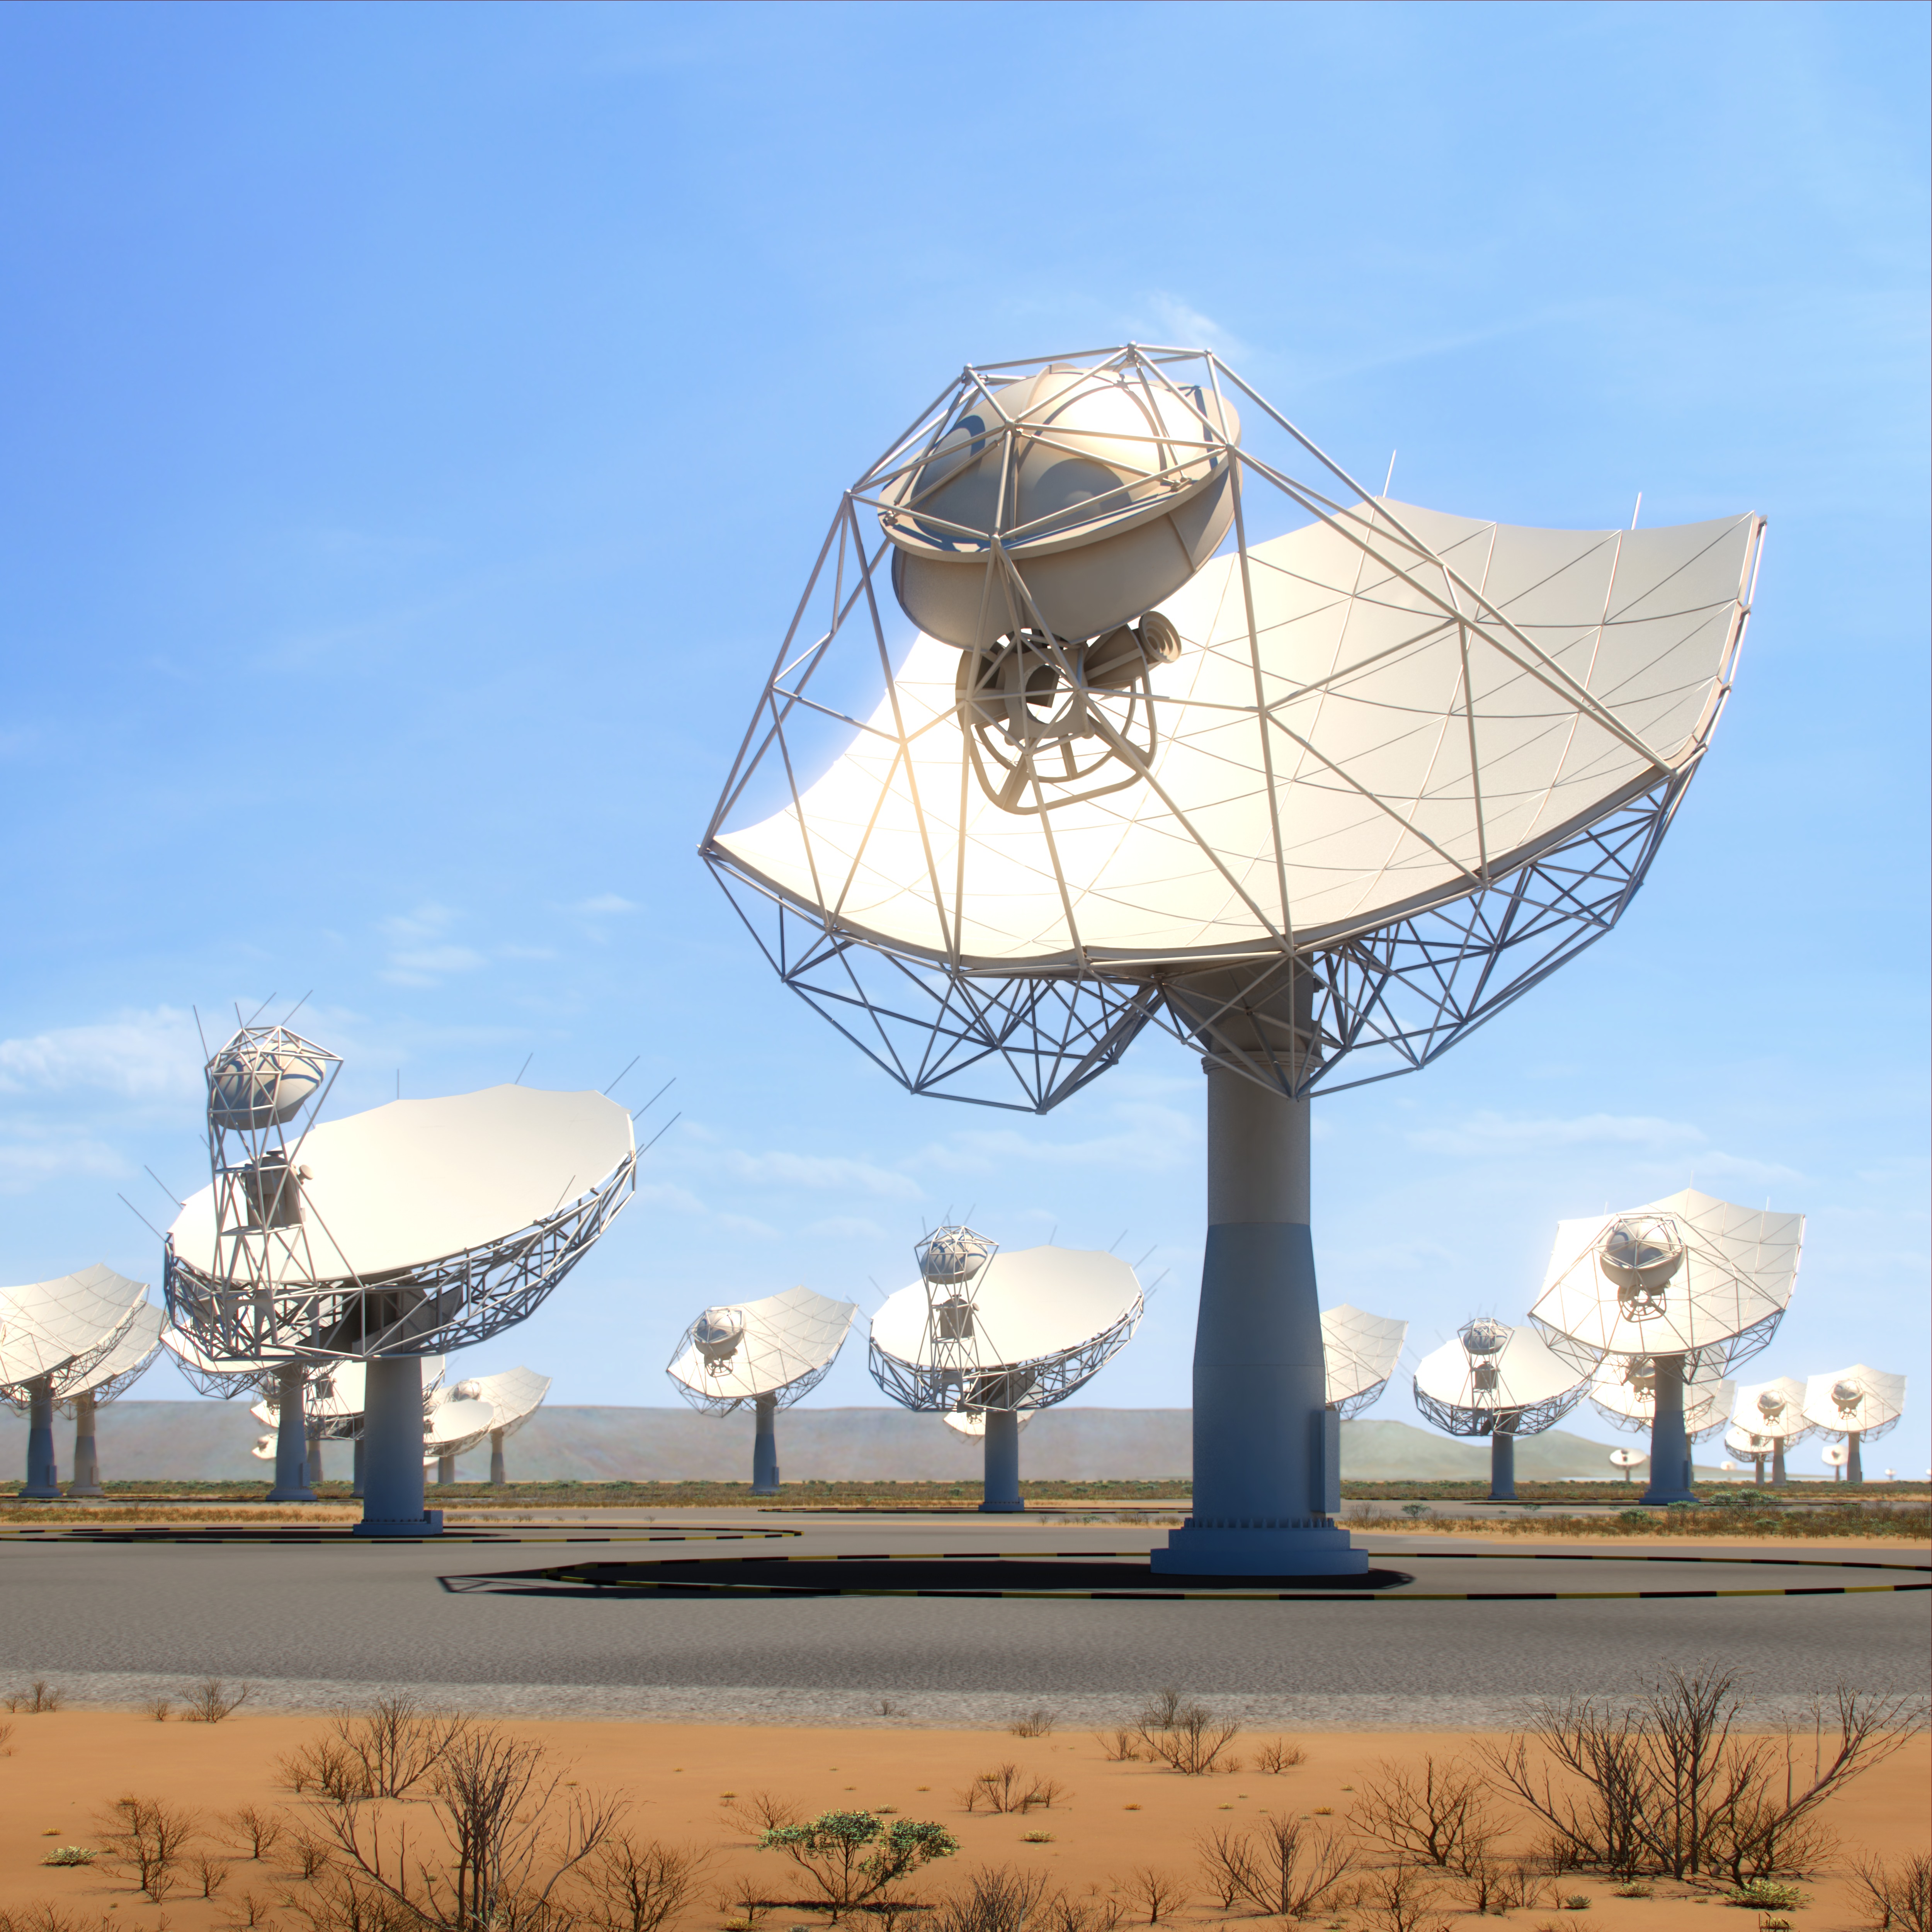 Artist's impression of the 15m SKA-mid dishes in the African desert showing how they may look once completed